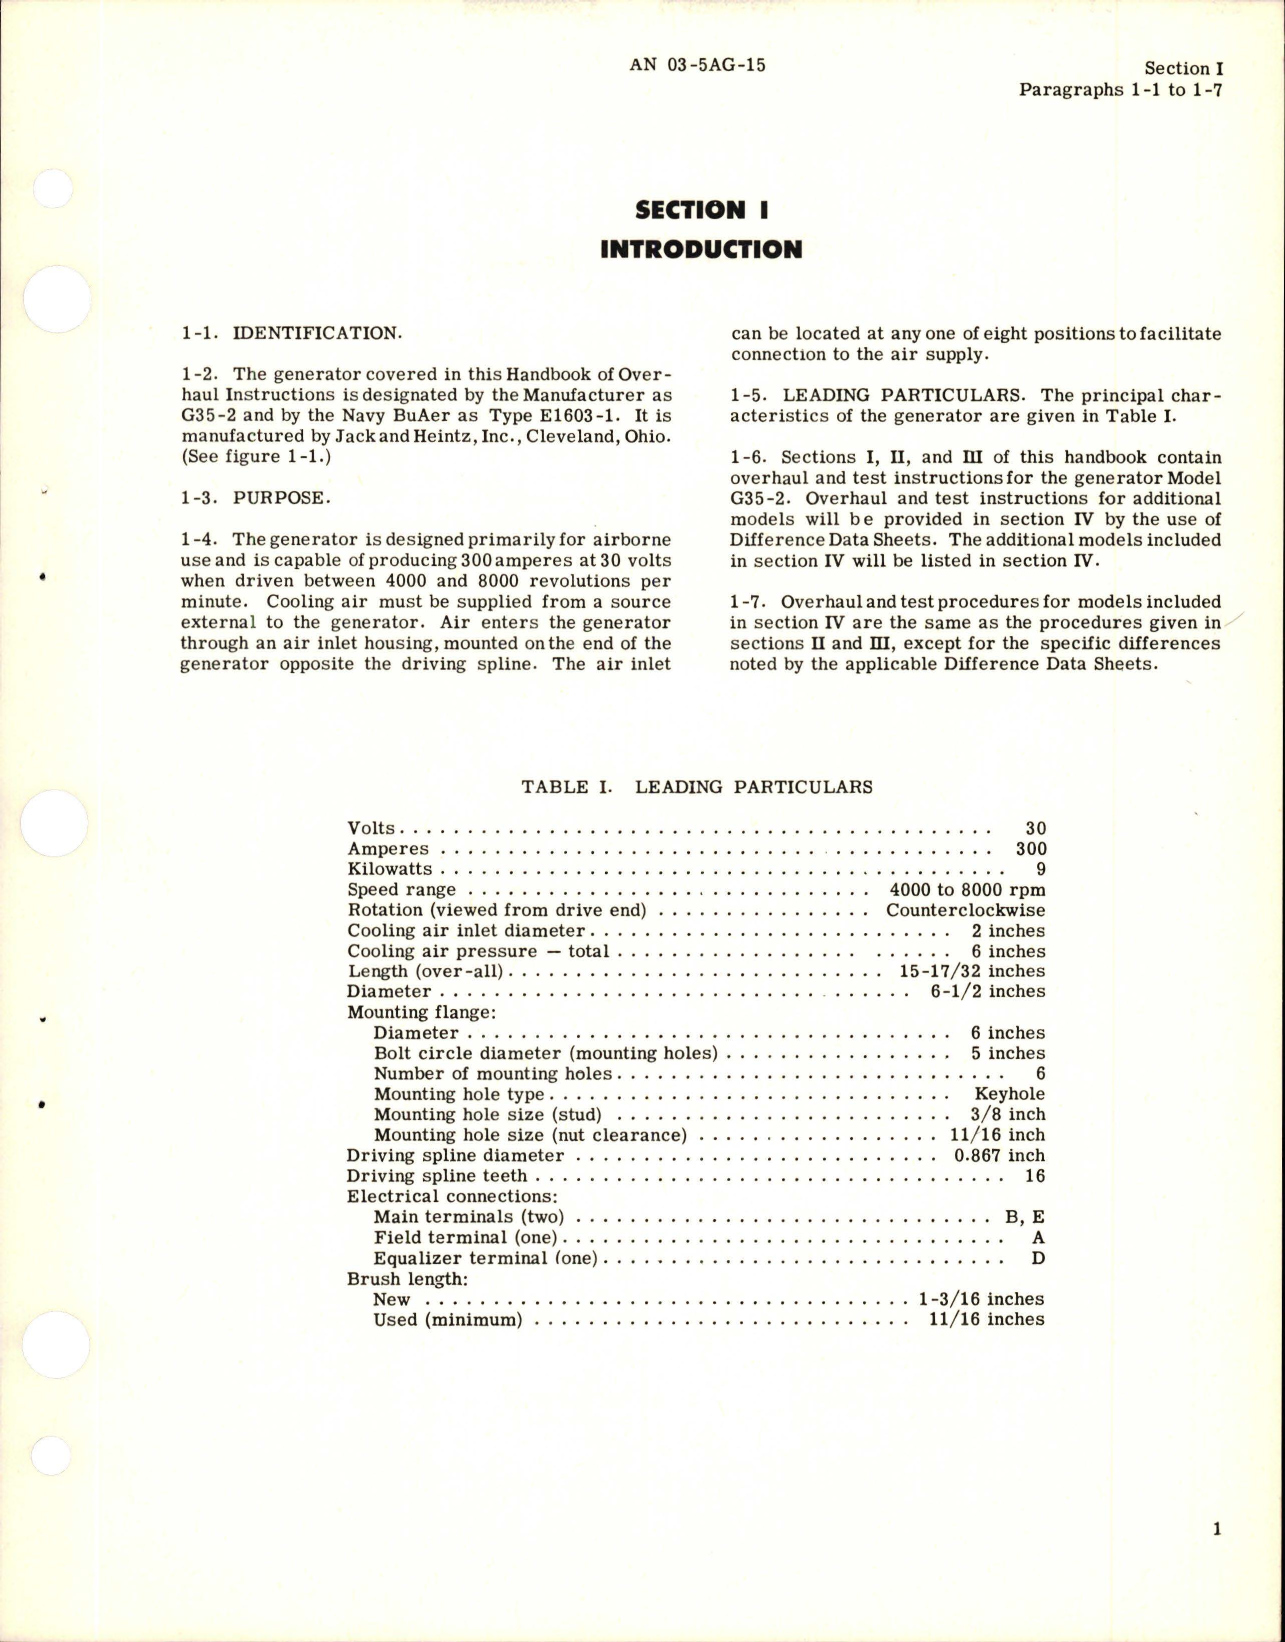 Sample page 5 from AirCorps Library document: Overhaul Instructions for Generator - Model G35-2